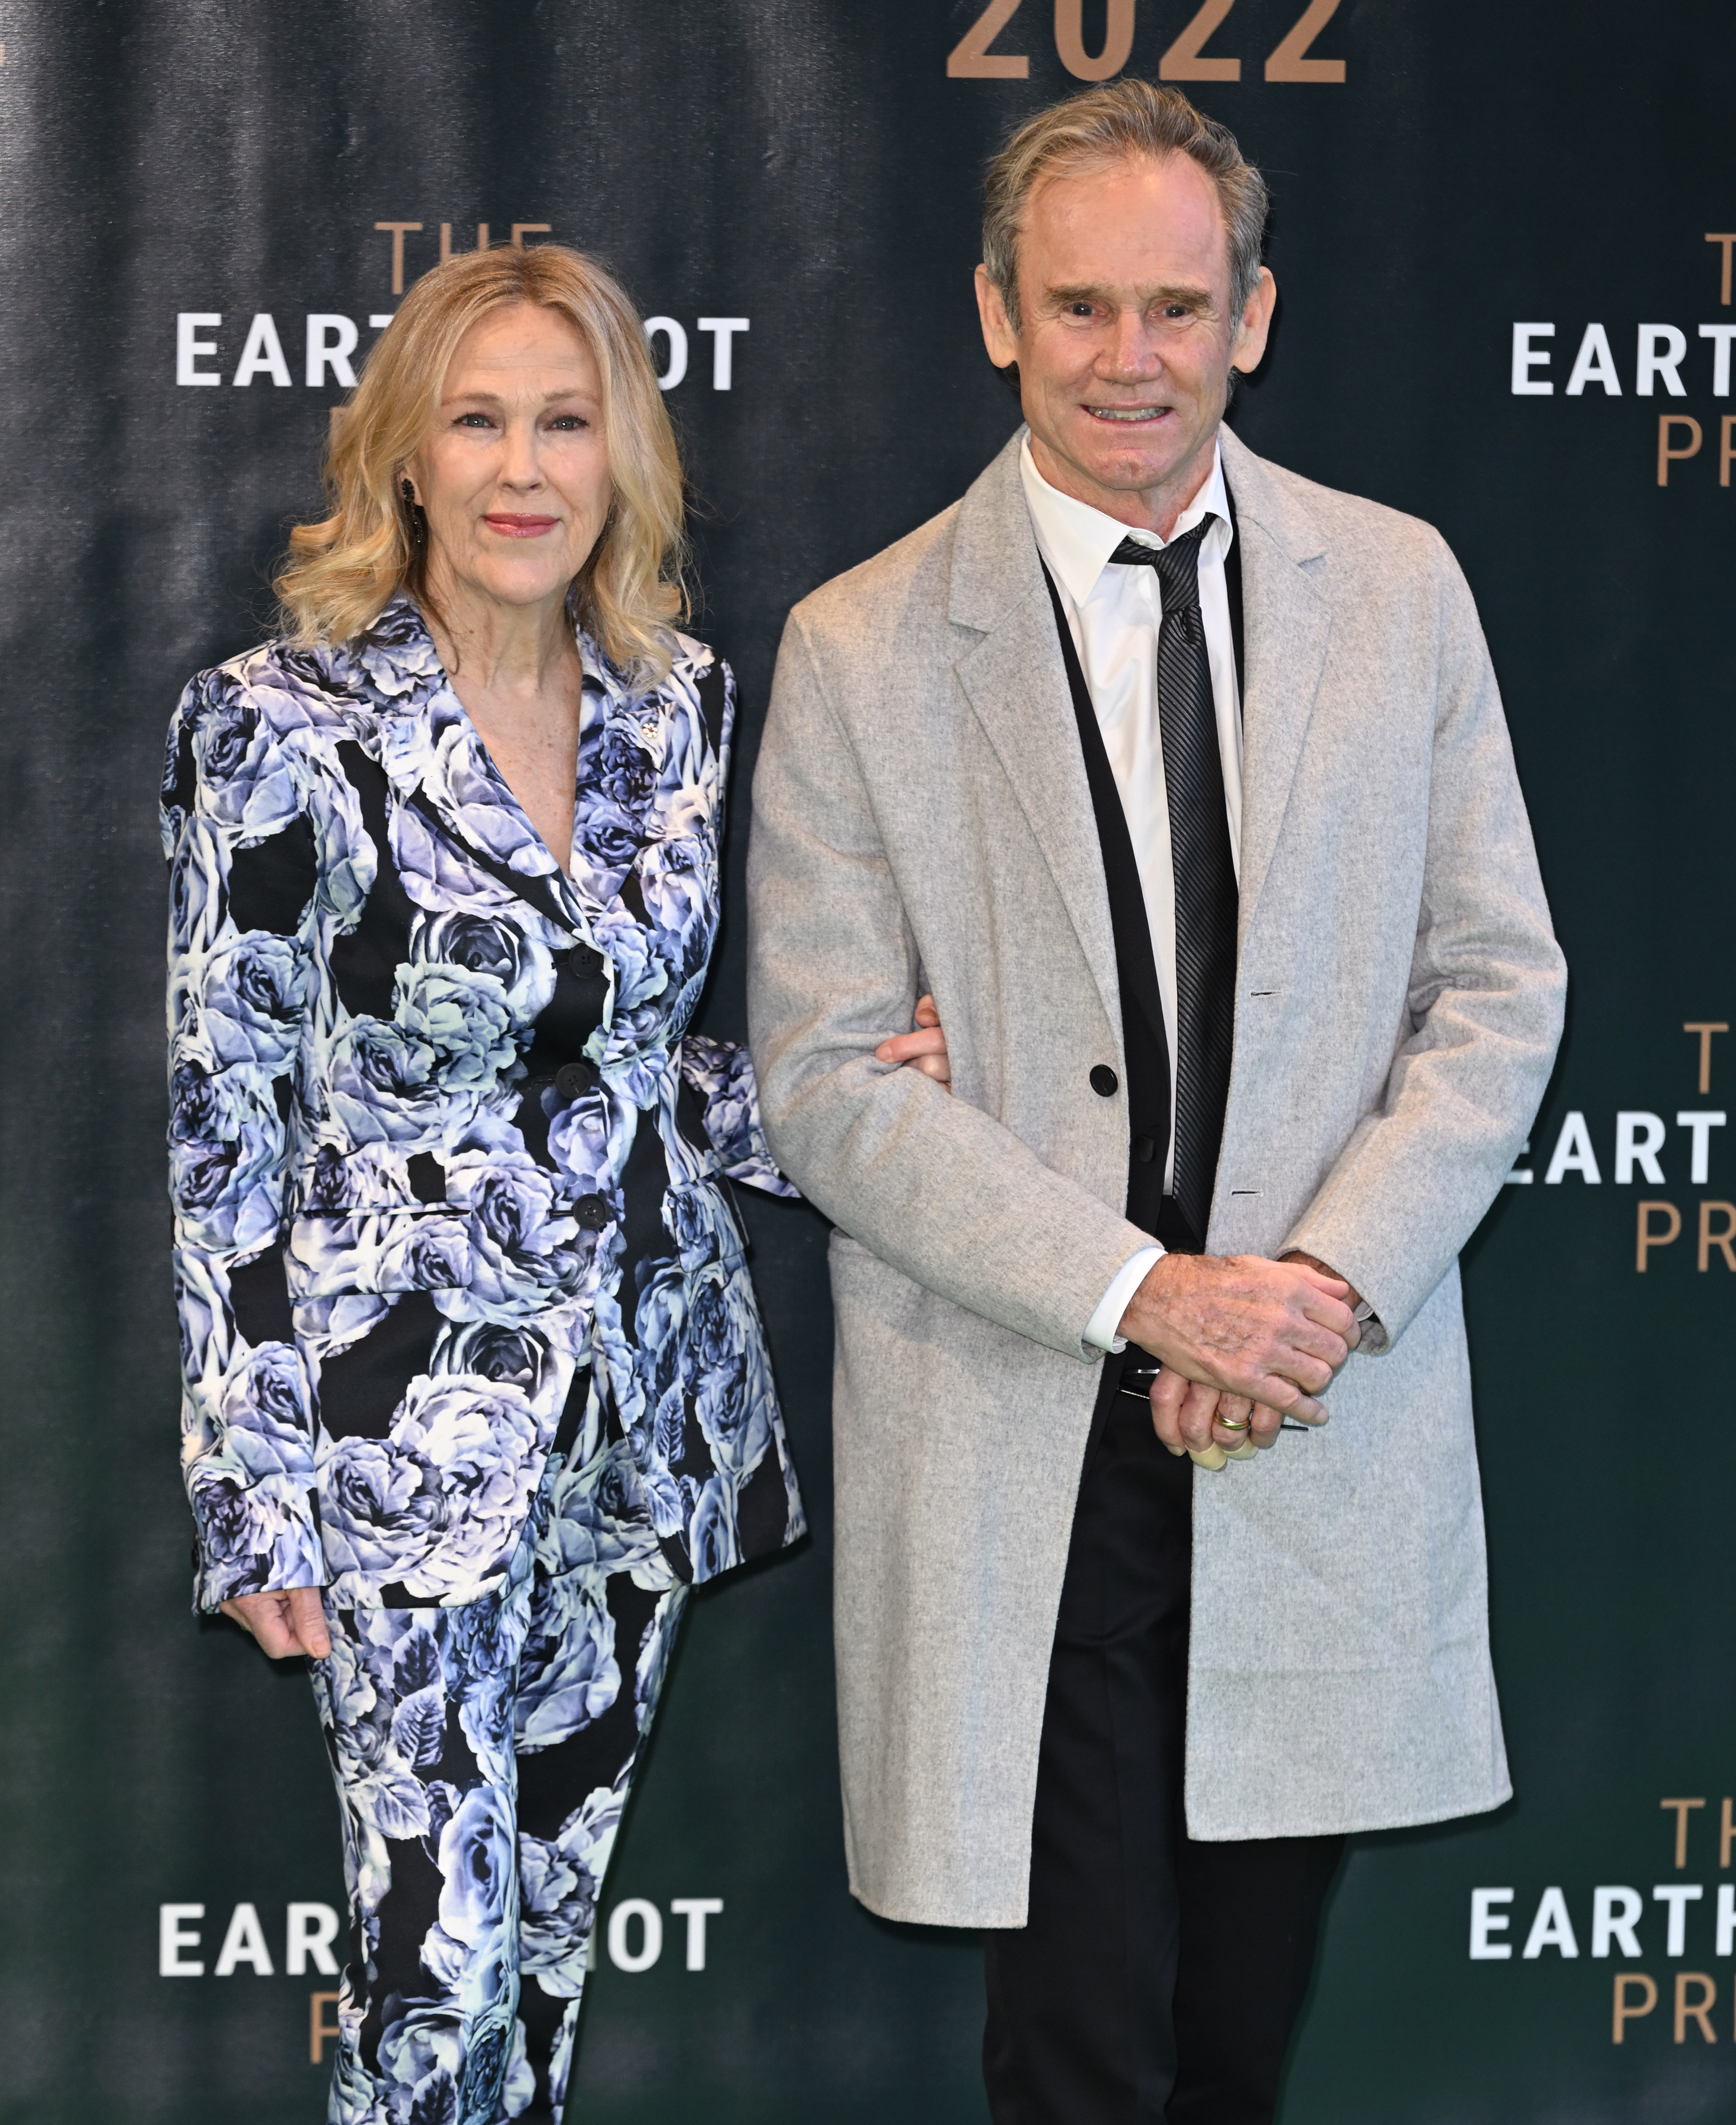 Catherine O'Hara and Bo Welch at The Earthshot Prize event in Boston, Massachusetts on December 2, 2022 | Source: Getty Images